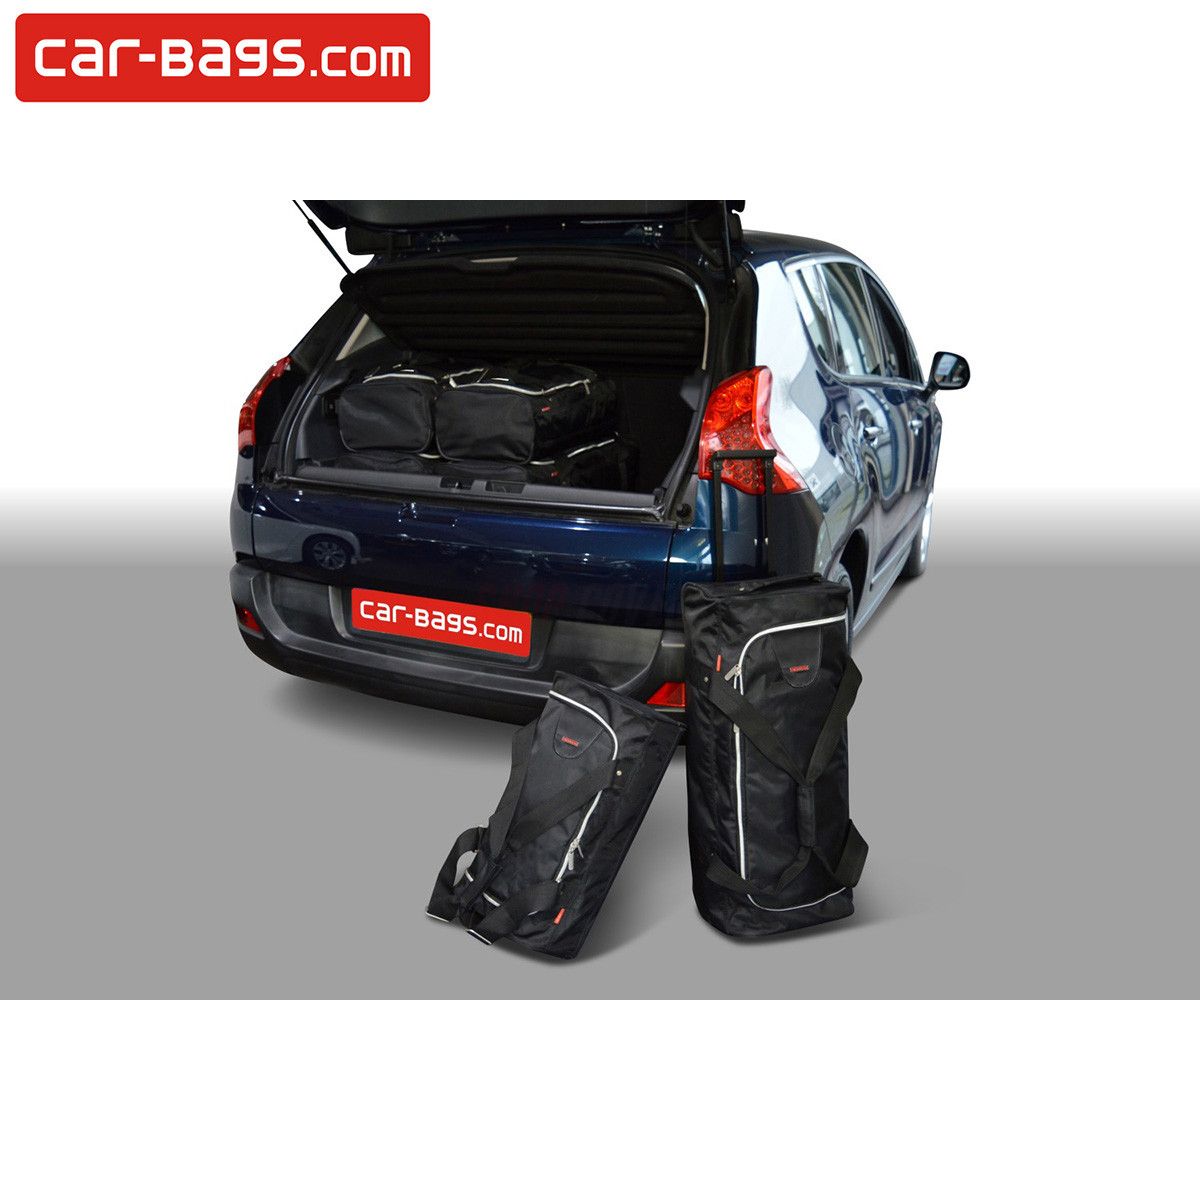 Travel bags fits Peugeot 3008 tailor made (6 bags), Time and space saving  for € 379, Perfect fit Car Bags